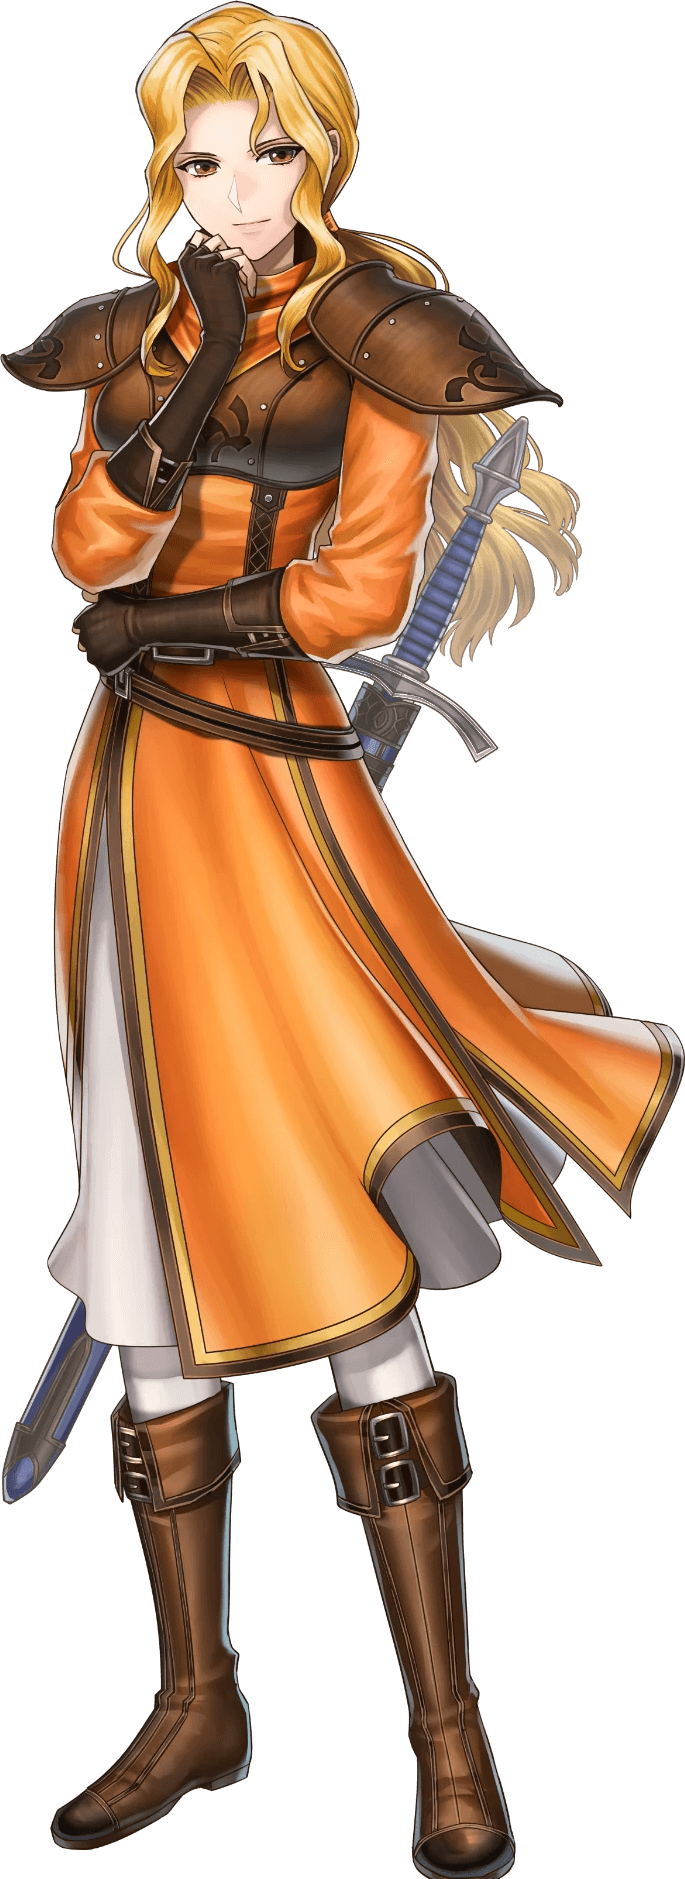 Eyvel's portrait from Heroes. A calm blonde woman in an orange dress with a sword at her back.